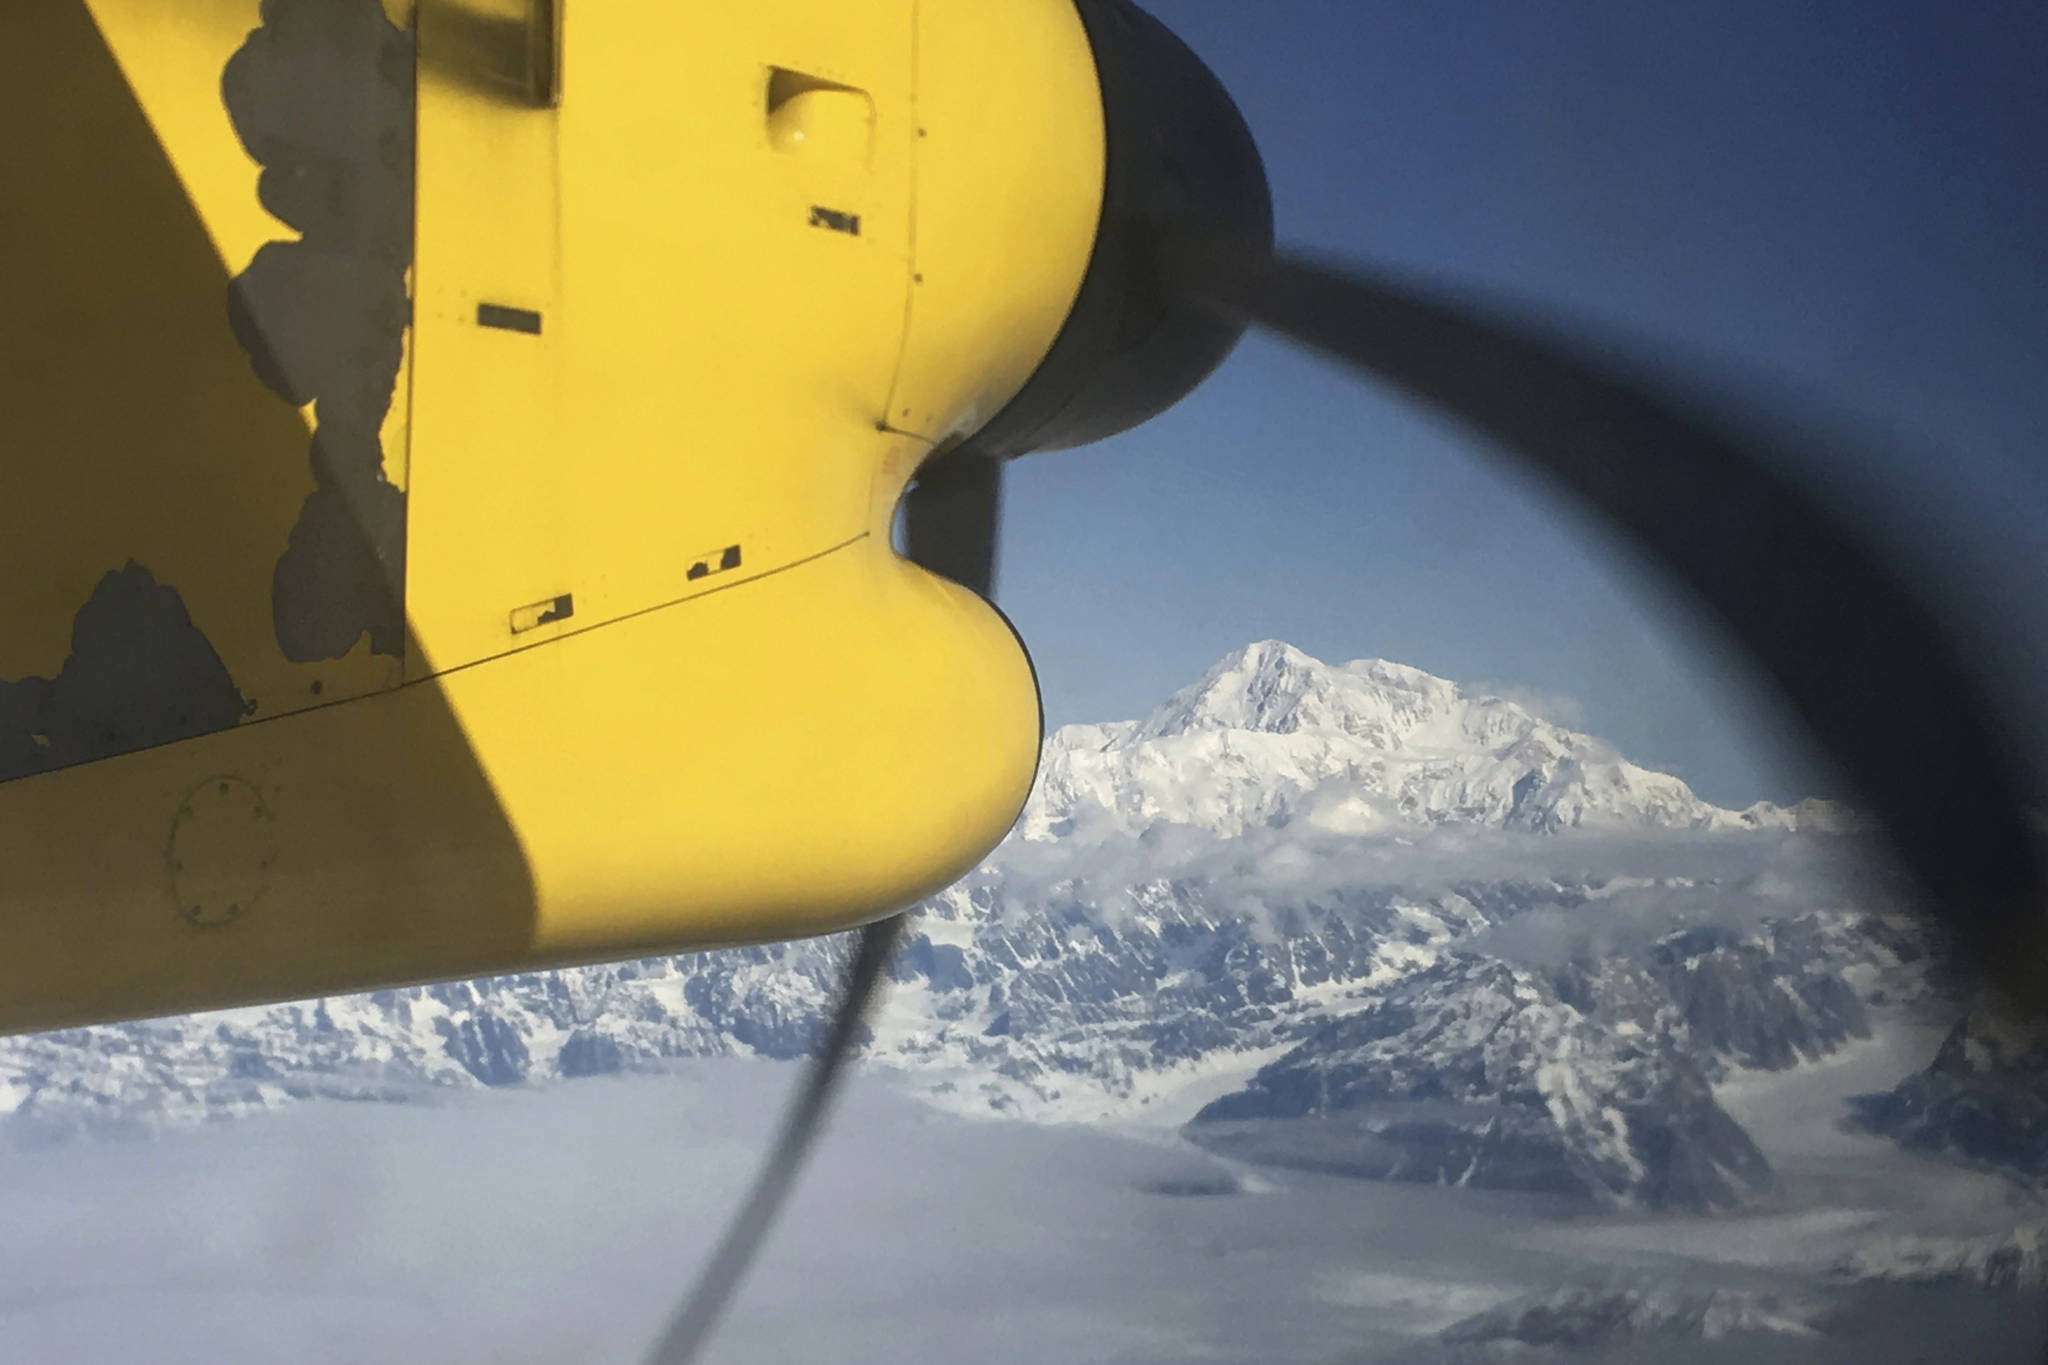 This May 10, 2017 file photo shows Denali, North America’s tallest peak, from an airplane flying over the Alaska Range near Talkeetna, Alaska. Officials on Monday, April 5, 2021, said five people had to ski to a shelter after they landed on Ruth Glacier at the base of Denali on April 2, 2021, and a heavy snowstorm stranded them for at least three days. (AP Photo/Mark Thiessen, File)